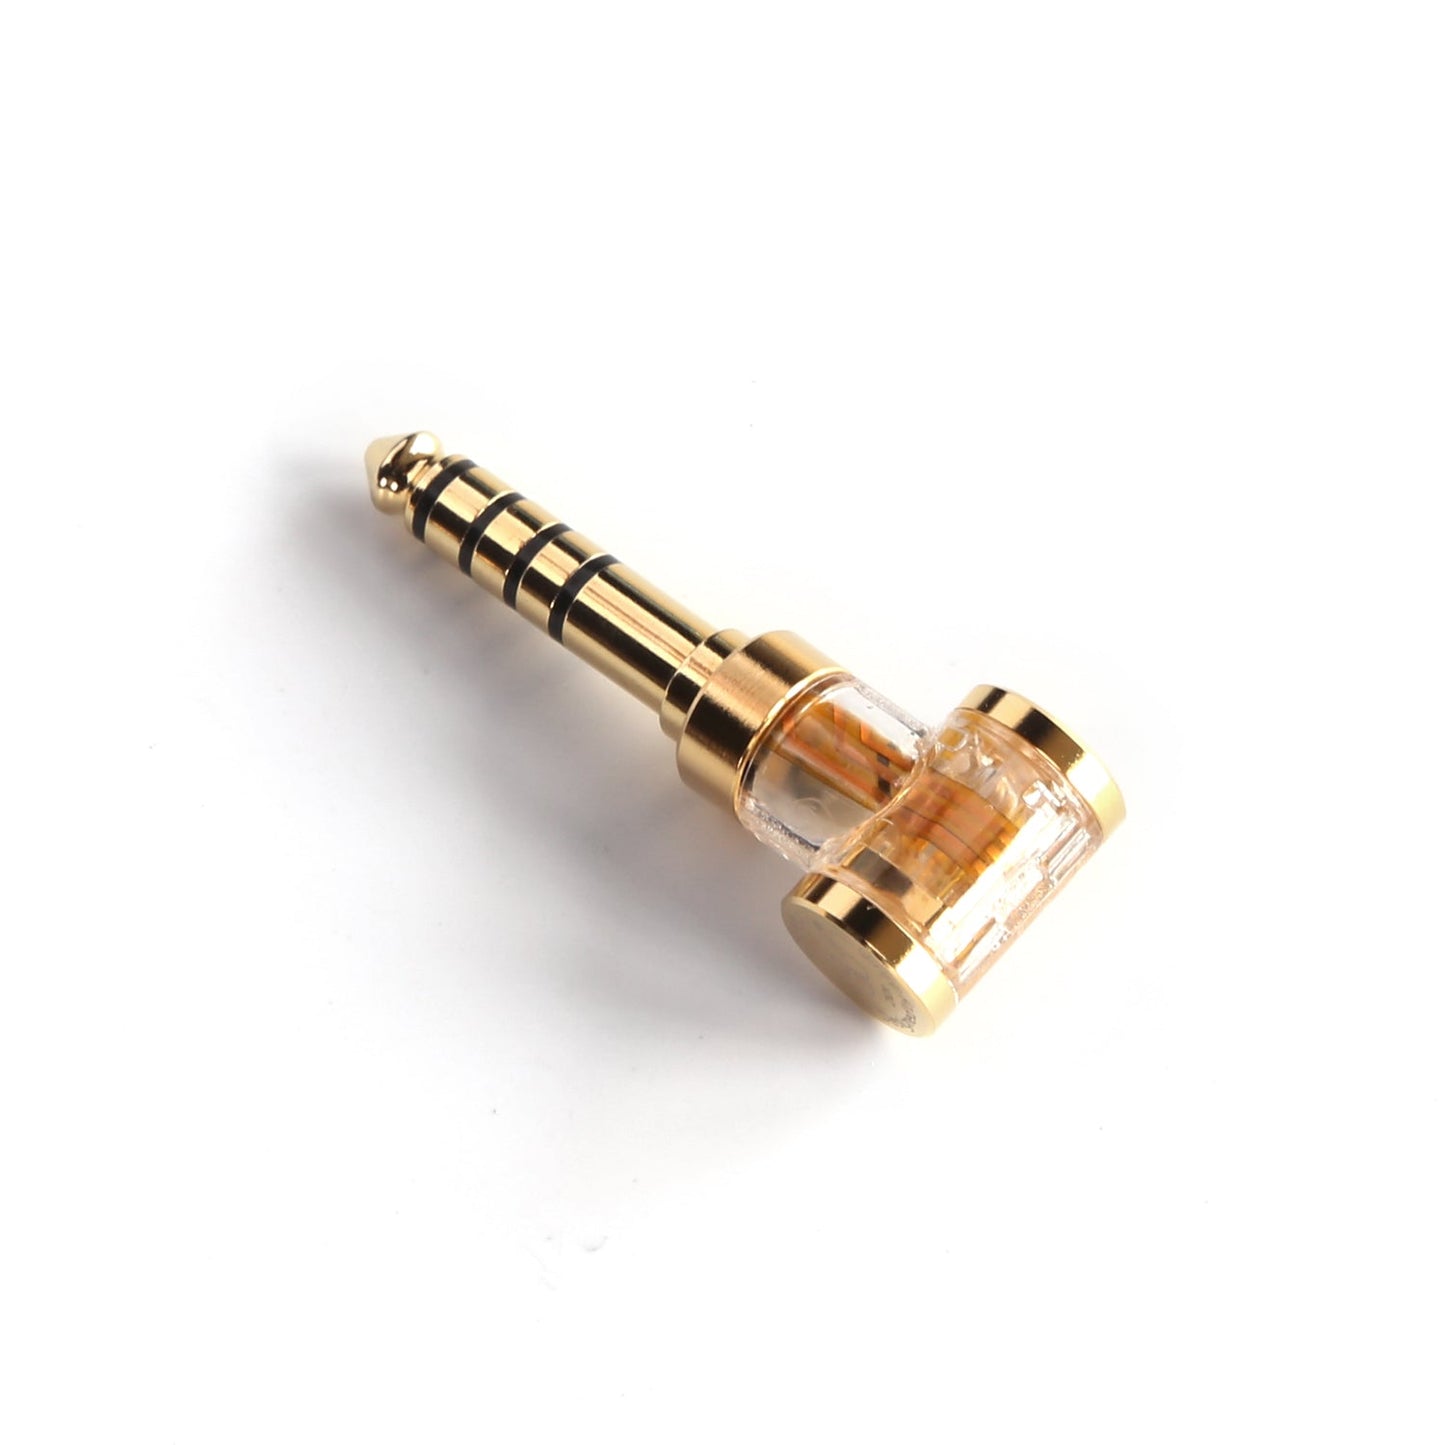 ddHiFi DJ35AG & DJ44AG Gold Plated 2.5mm Female to 3.5mm & 4.4mm Male Adapter